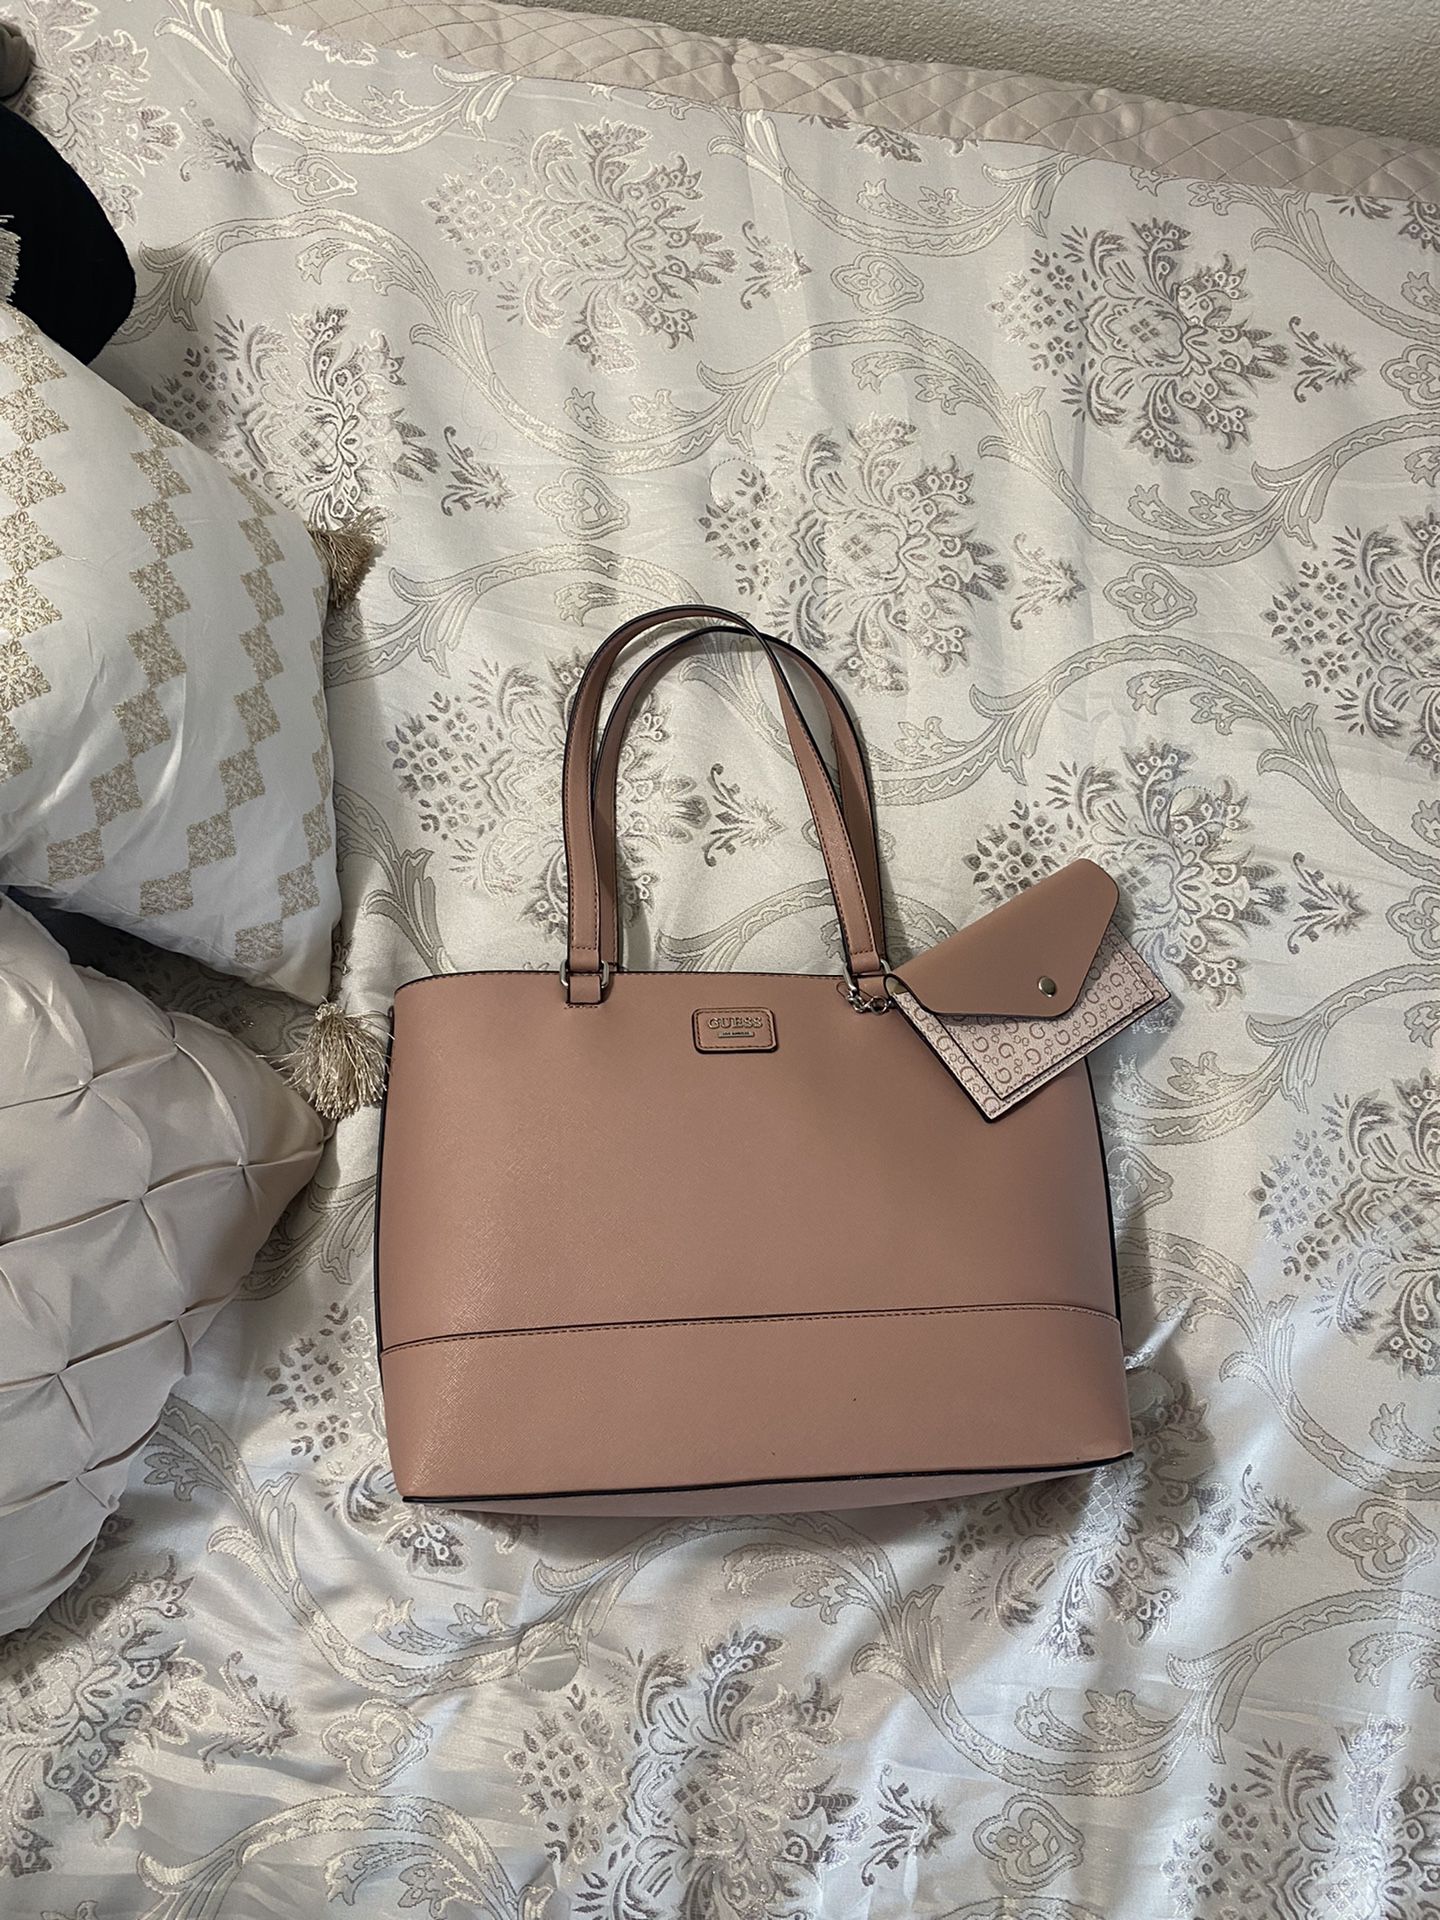 Guess Purse And Matching Wallet 